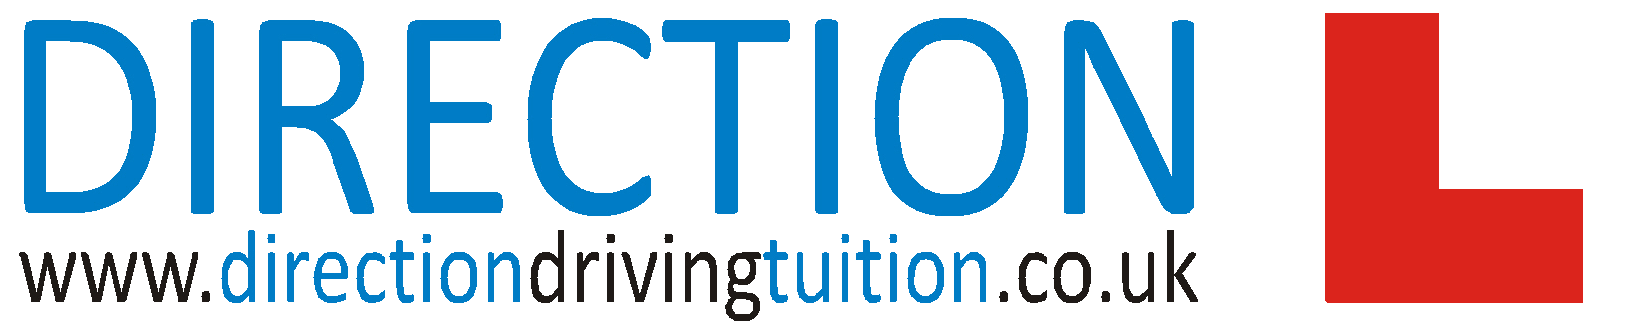 Direction Driving Tuition logo